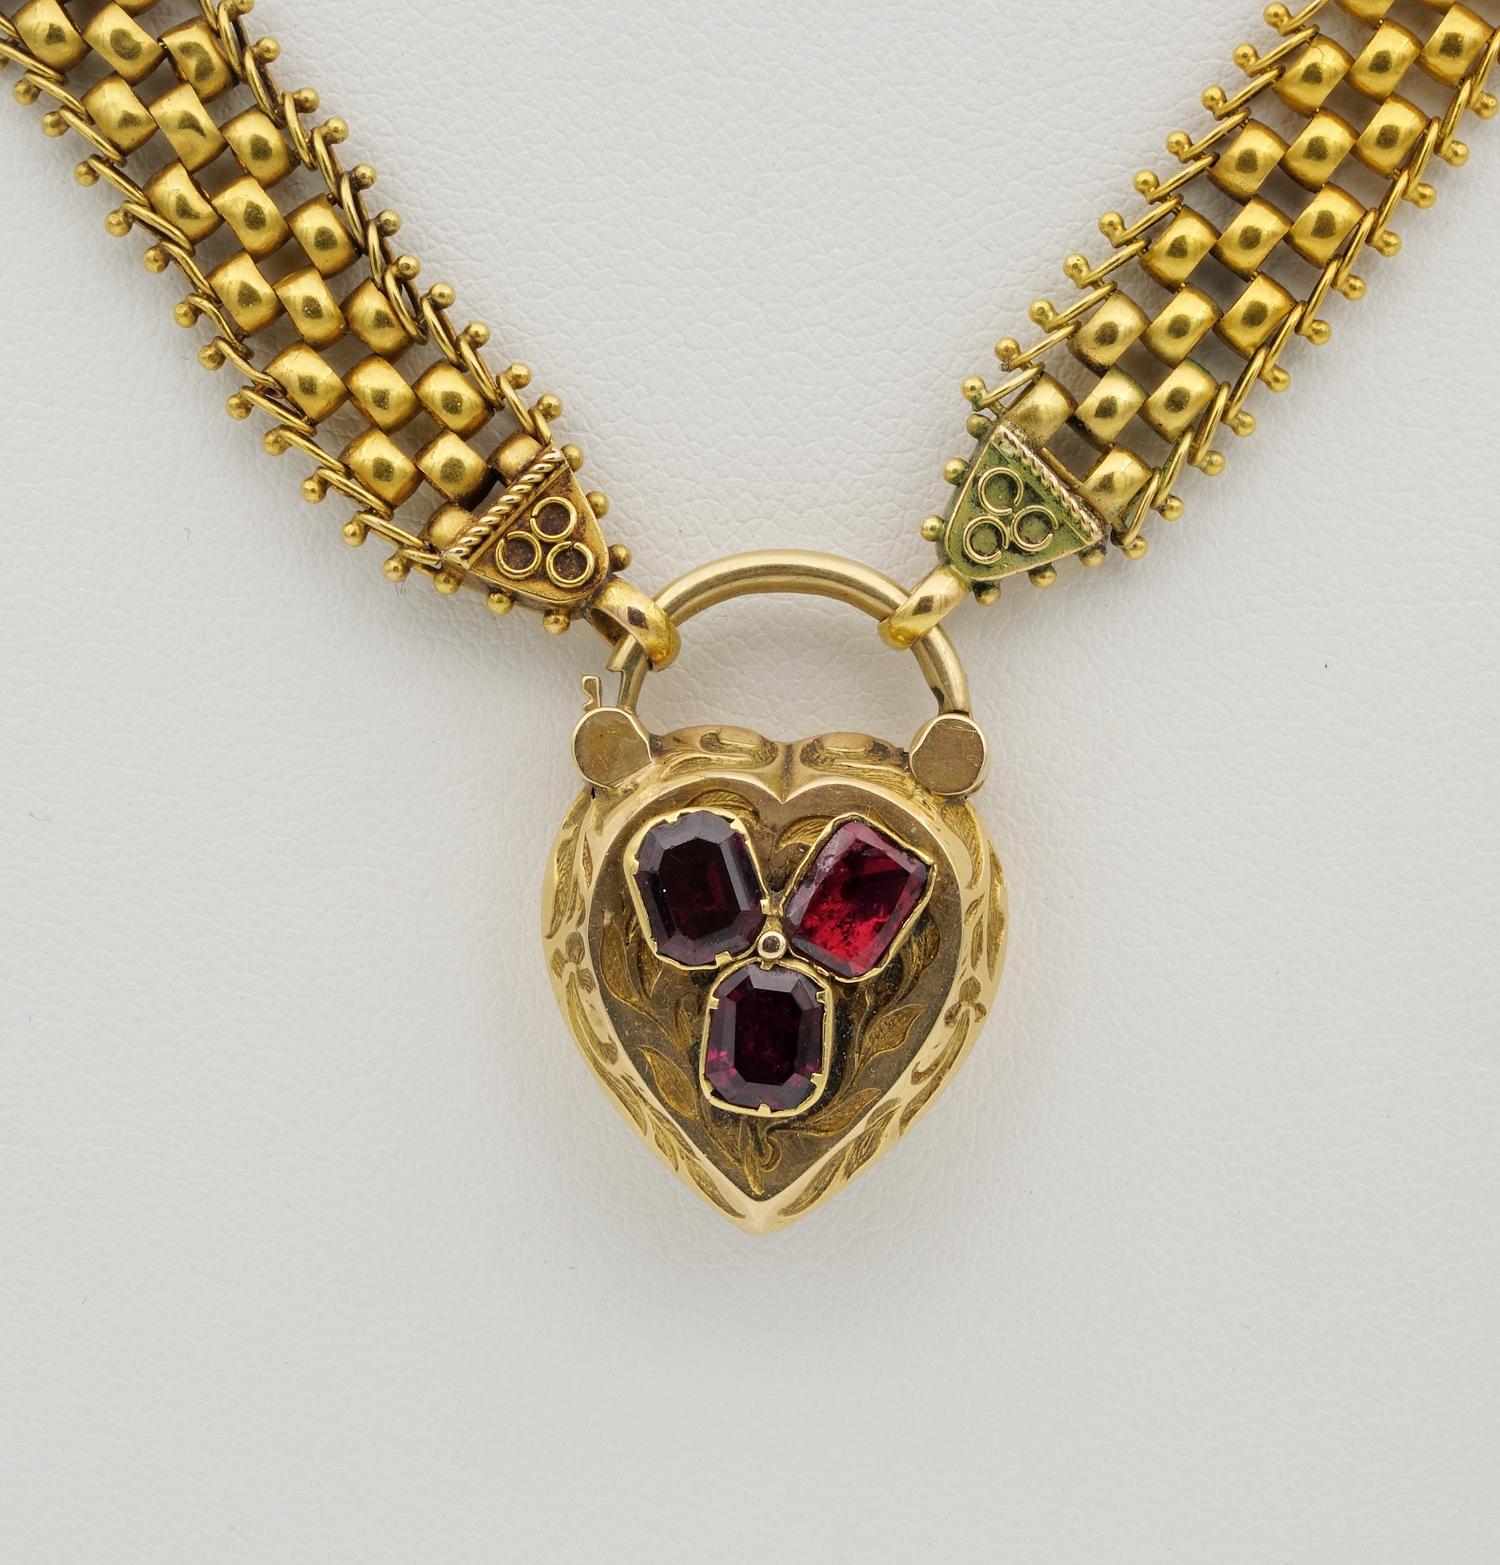 Magnificent 18 Karat gold Mid Victorian Flat Garnet Padlock Boxed Full Necklace In Fair Condition For Sale In Napoli, IT